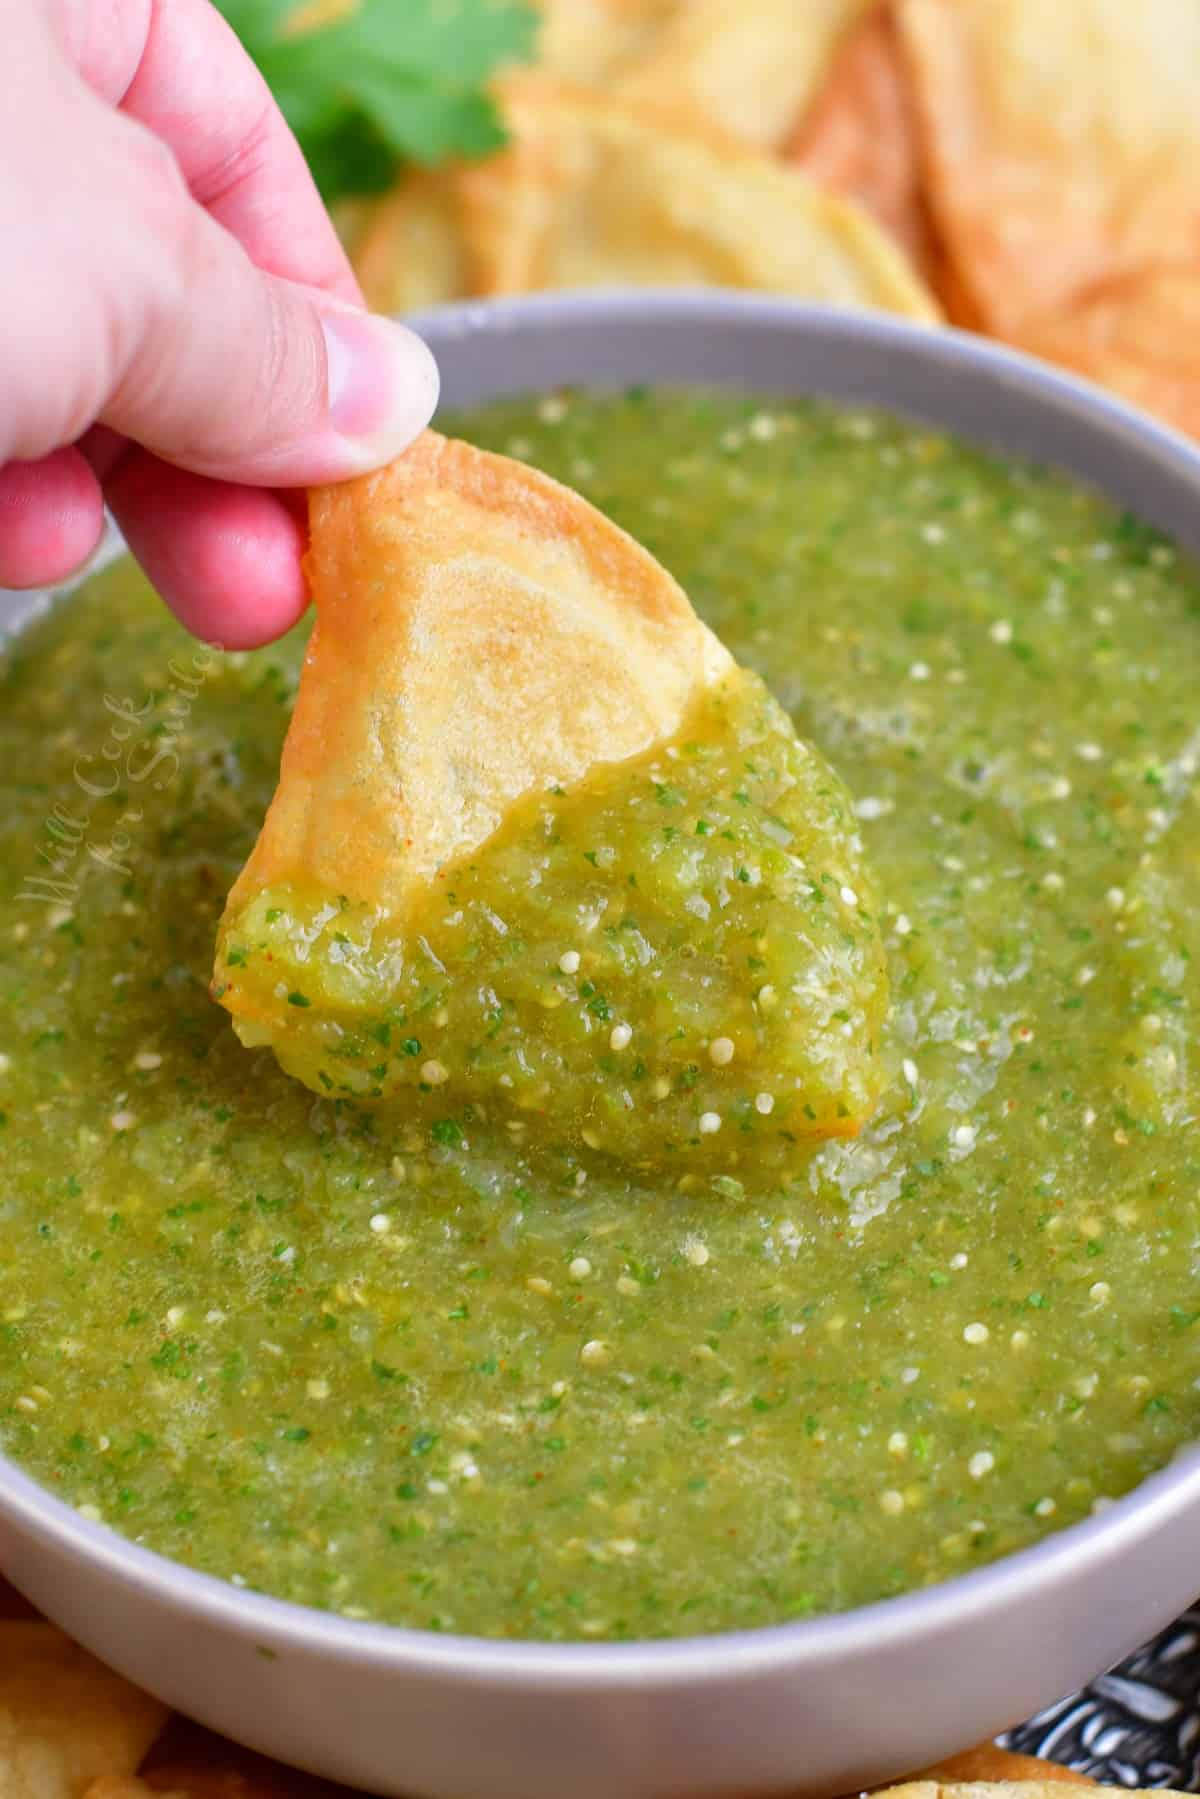 A triangular tortilla chip is being dipped into a large bowl of salsa verde.